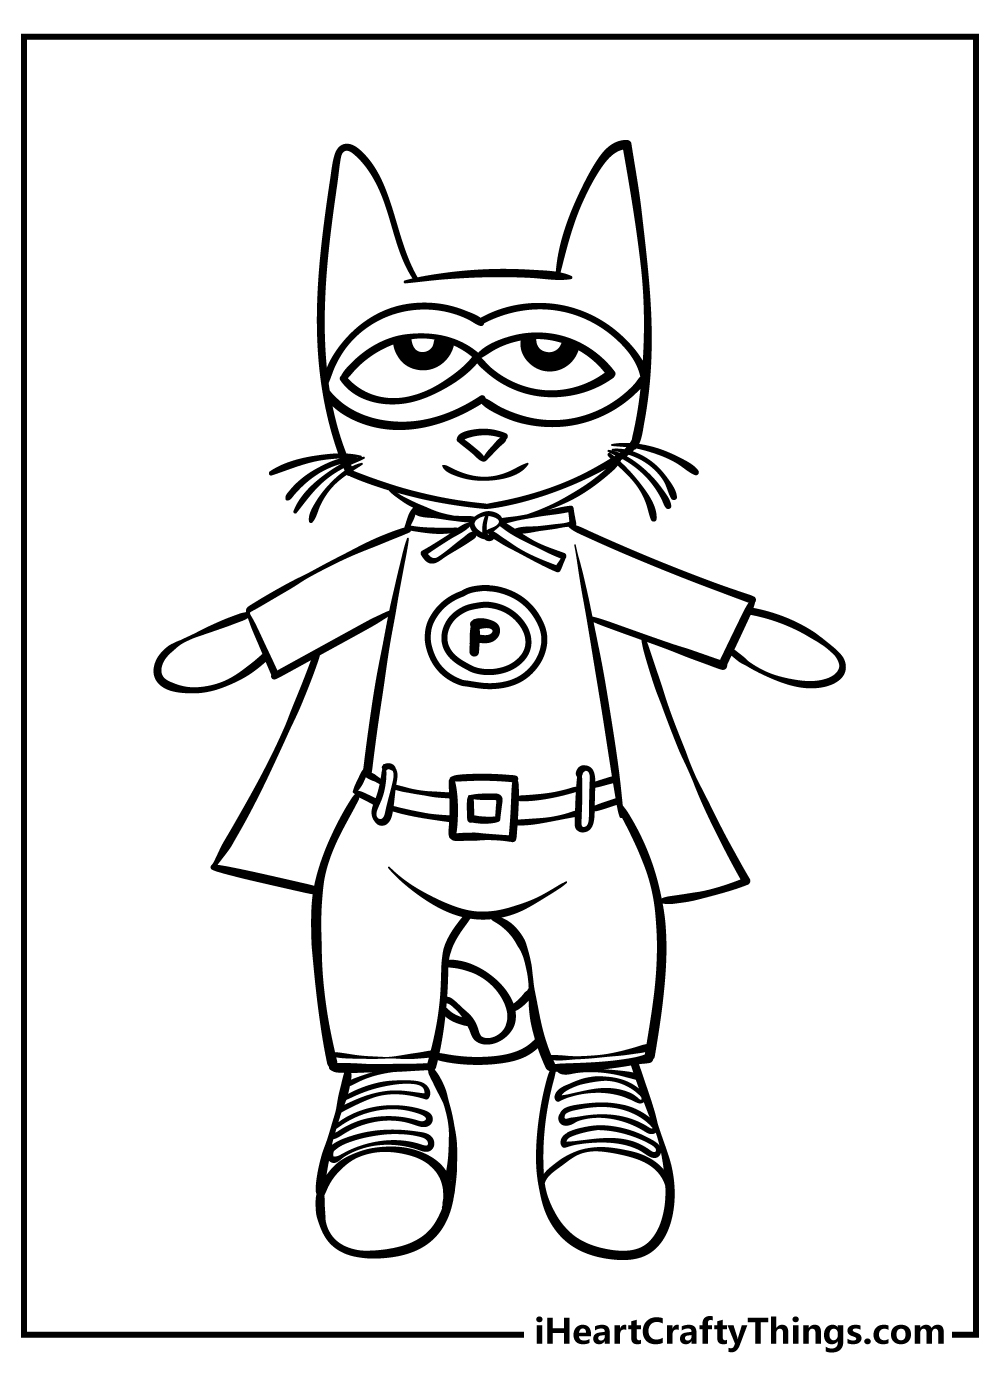 Pete The Cat Coloring Pages for preschoolers free printable